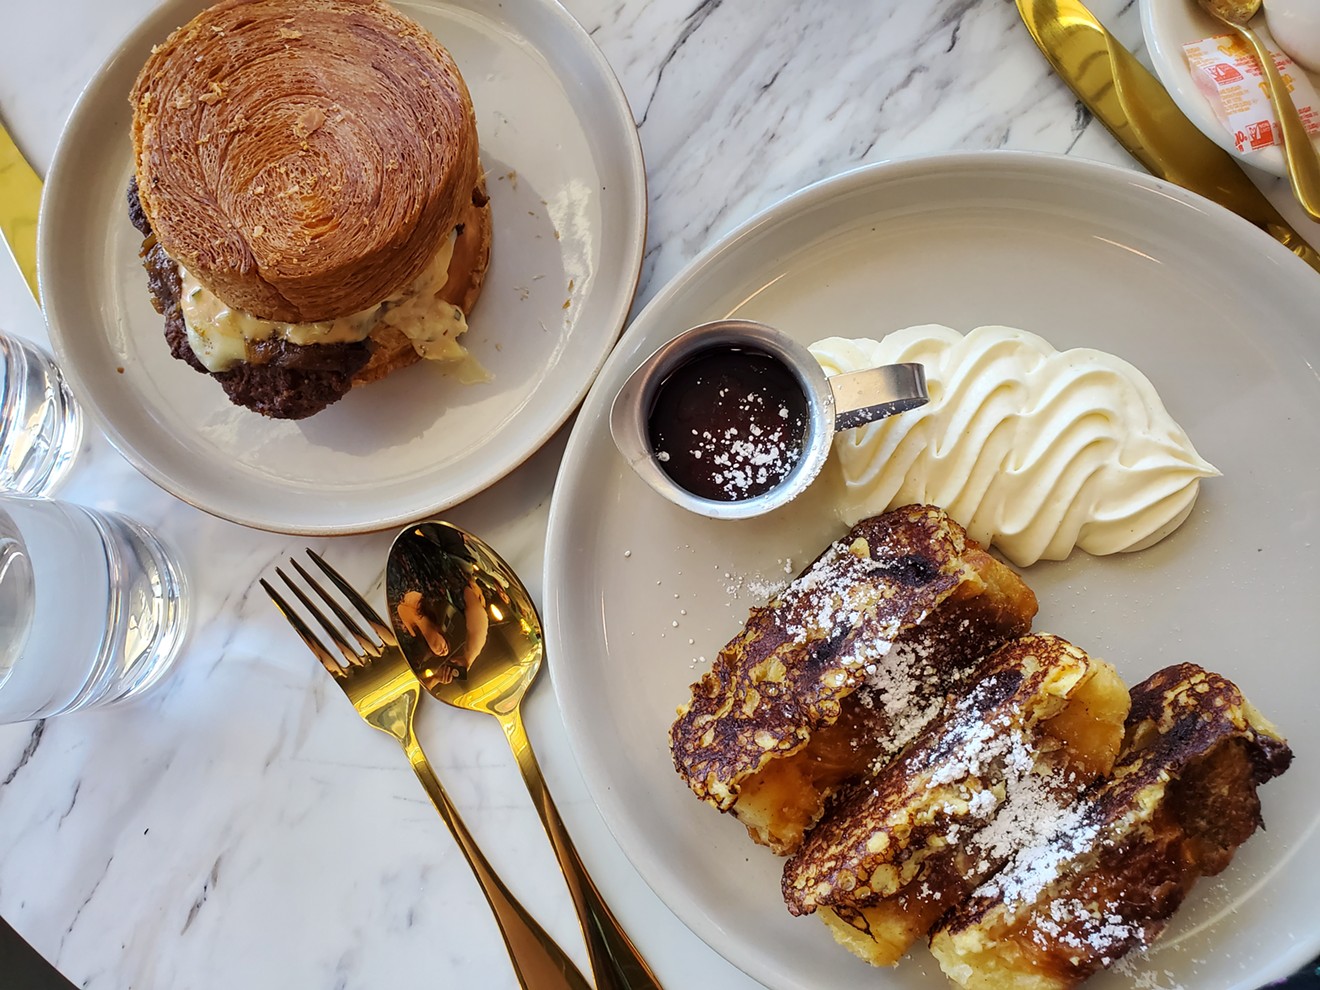 The chocolate croissant French toast is a dream for those that enjoy a sweet breakfast.